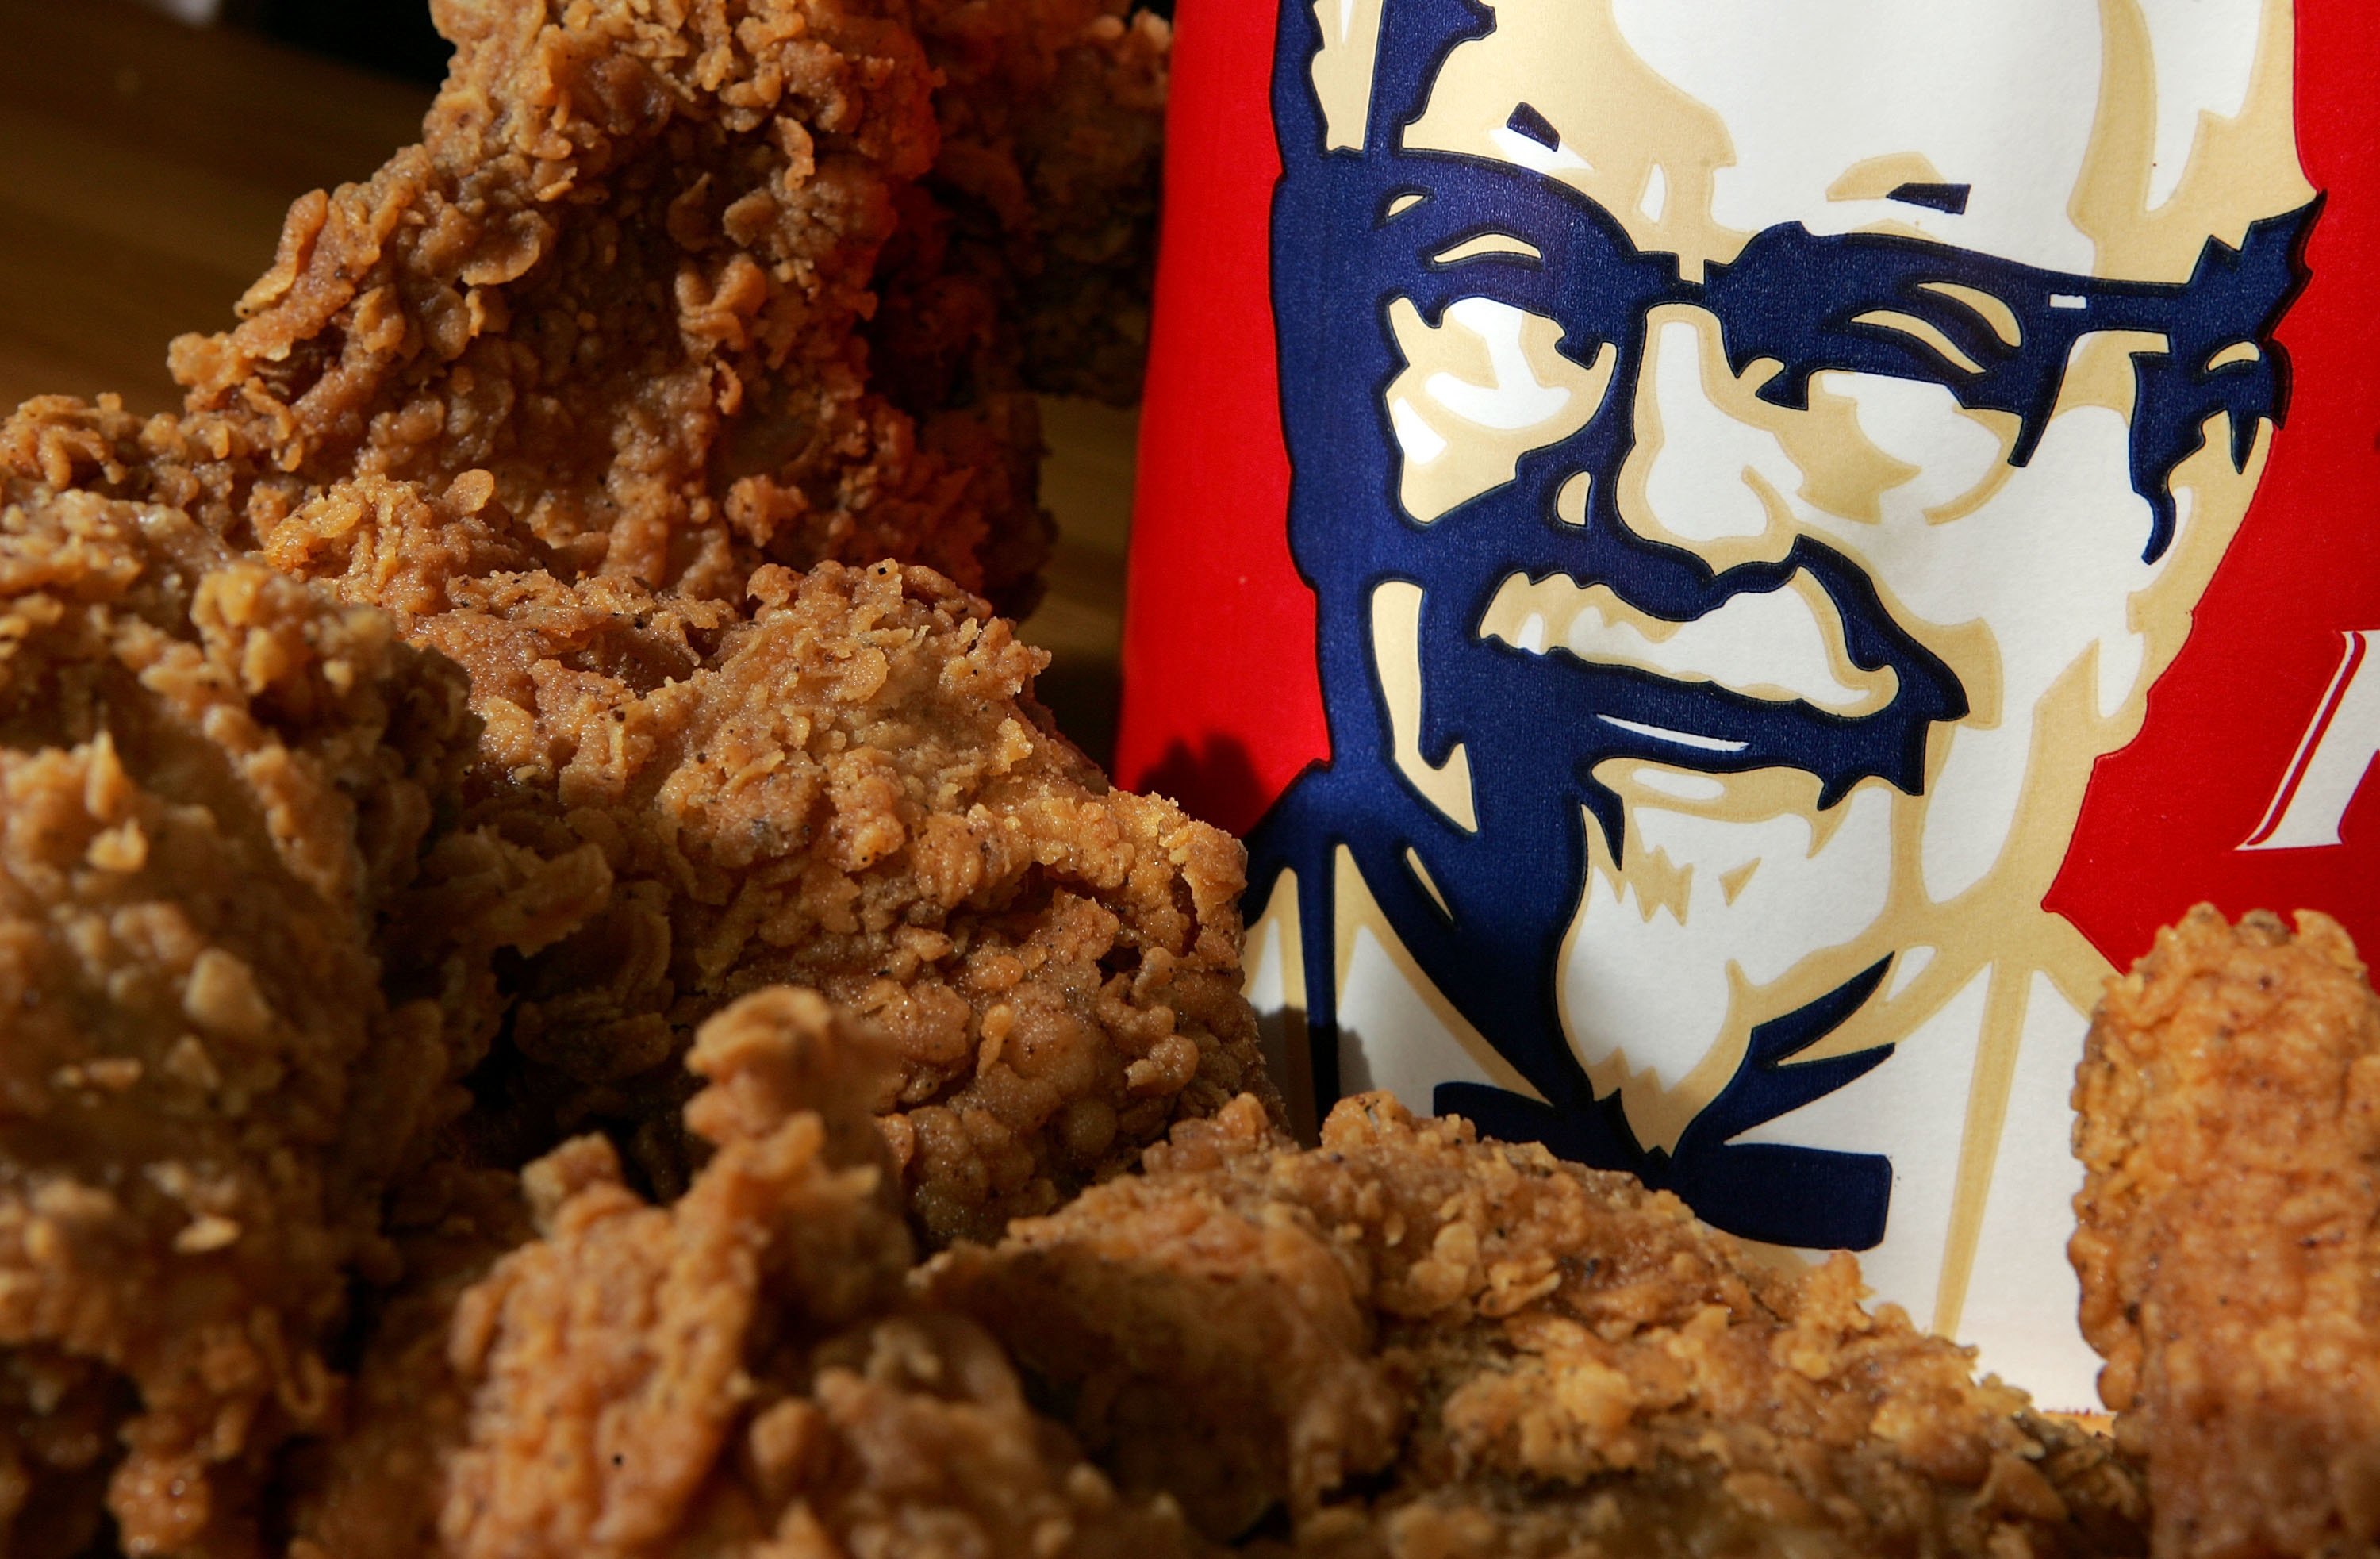 KFC dragged Morrison’s supermarket over a fried chicken meal on Twitter